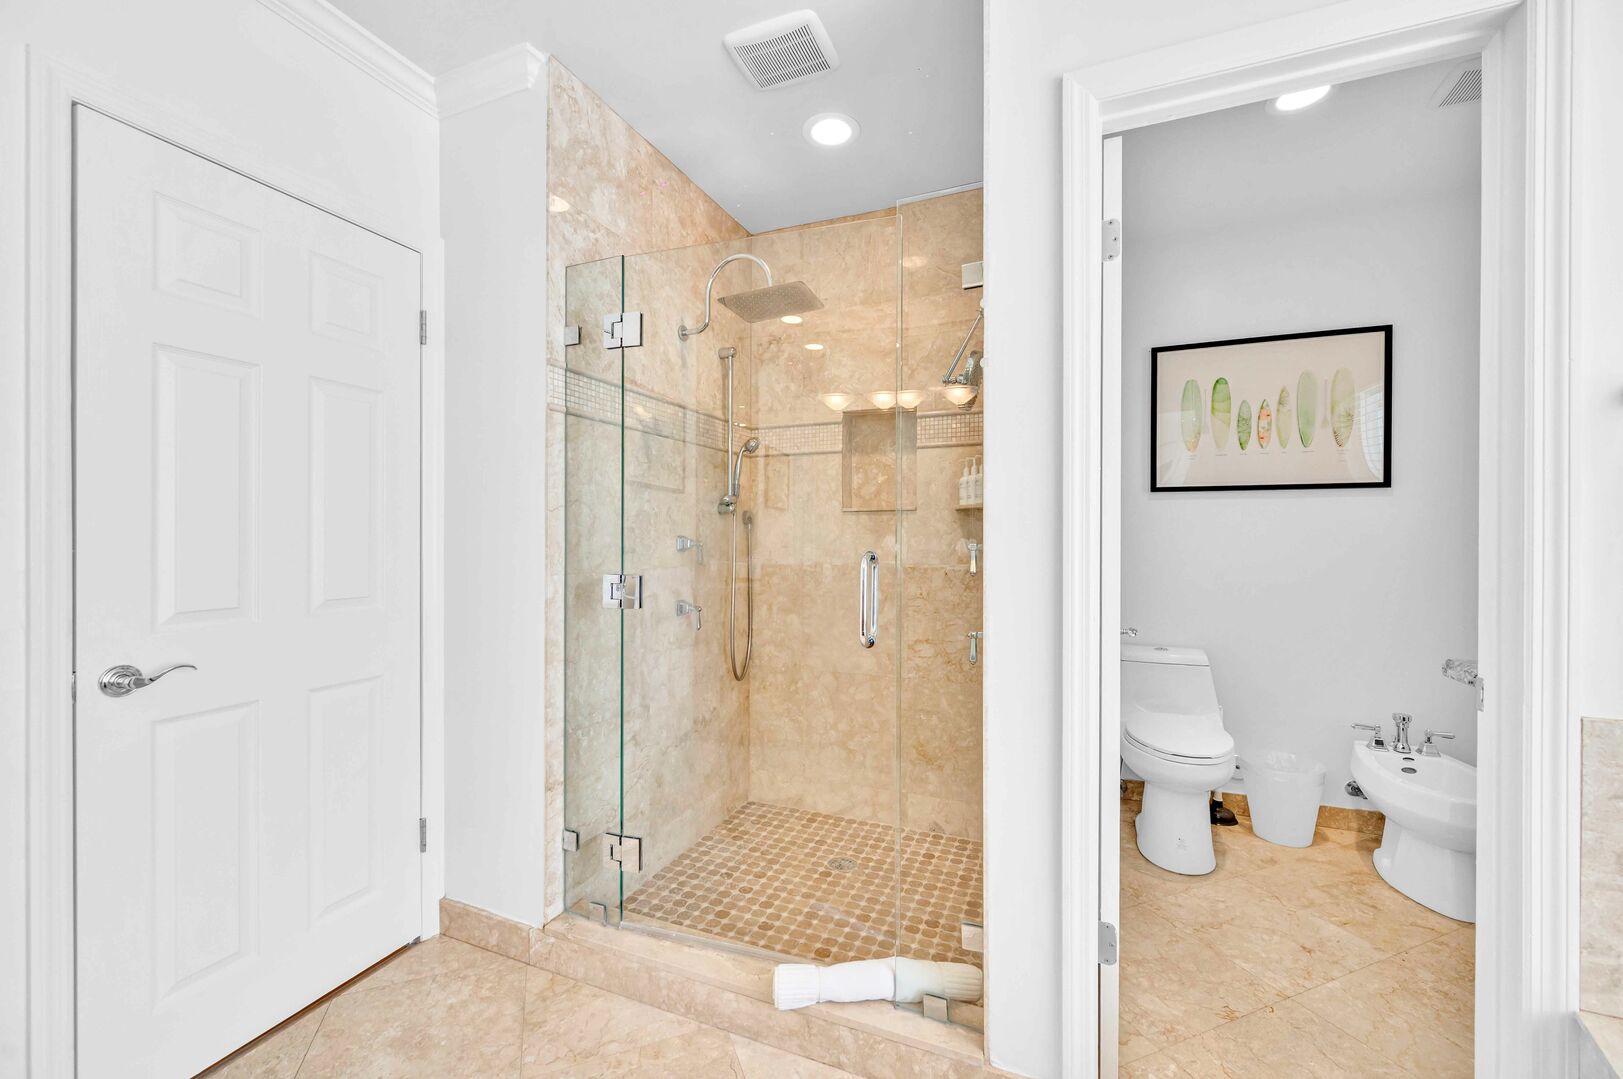 Large shower with toilet and bidet in a separate room for privacy